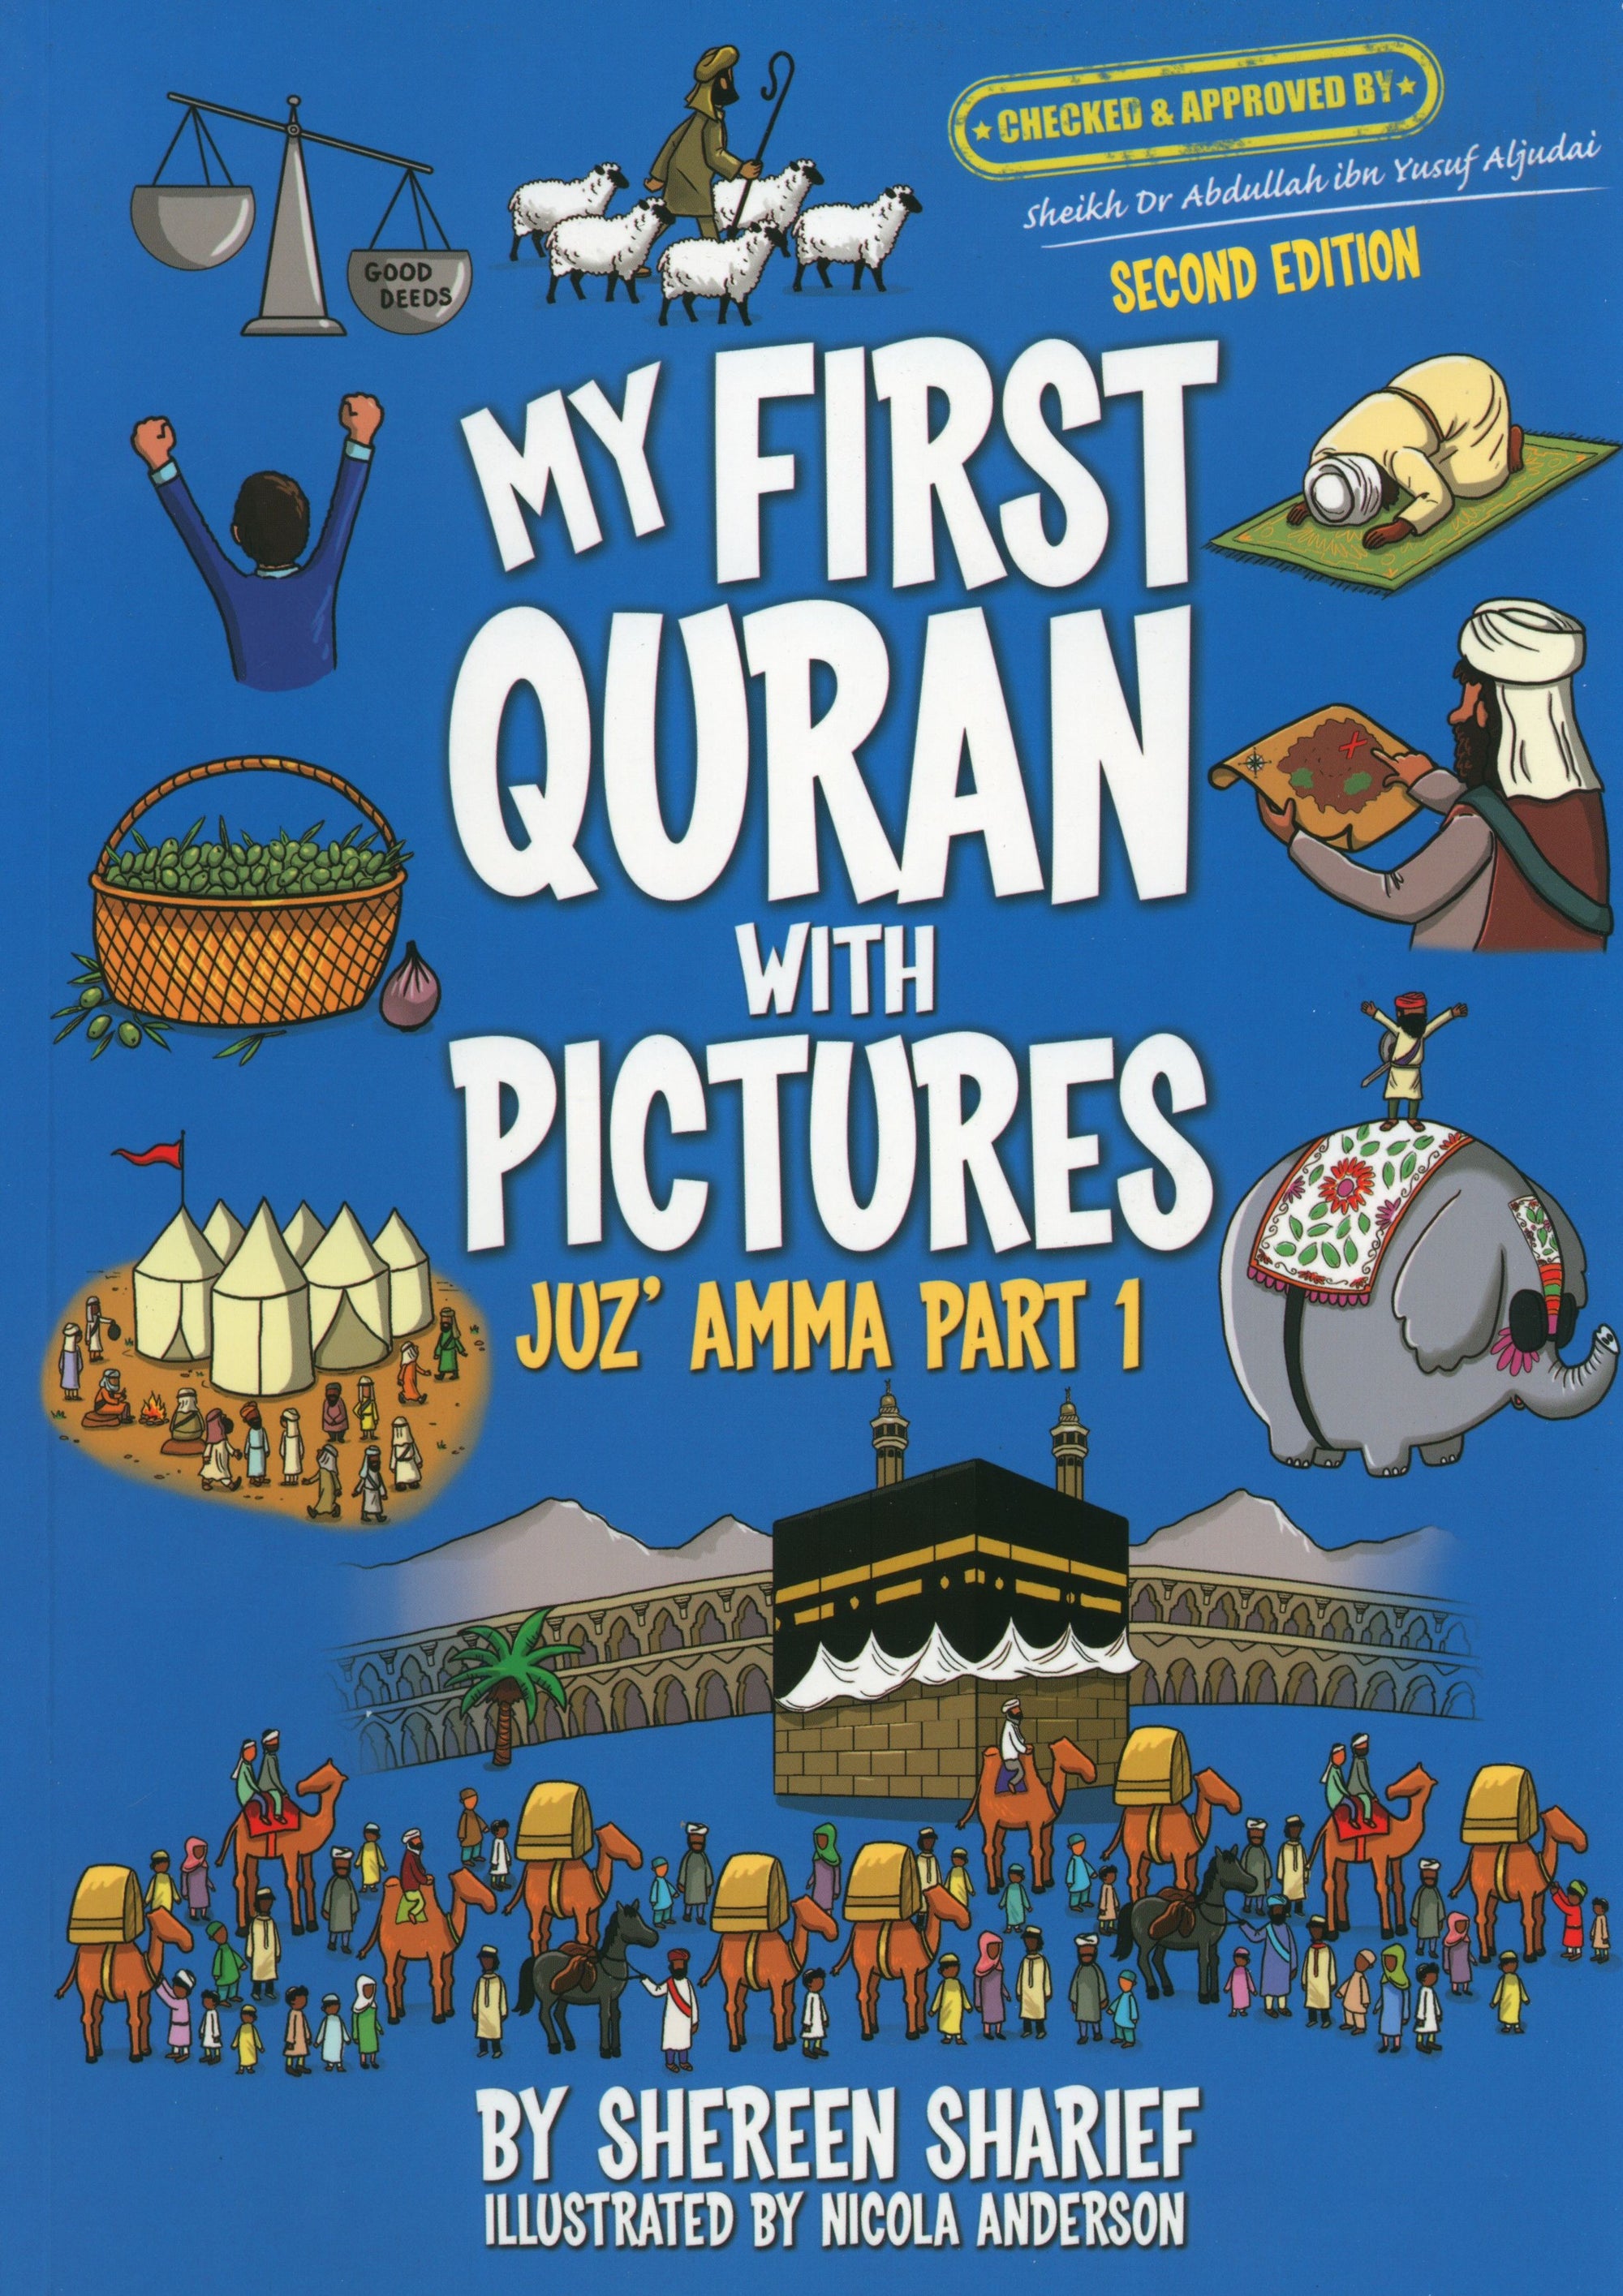 My First Quran With Pictures - Juz' Amma Part 1, 2nd Edition